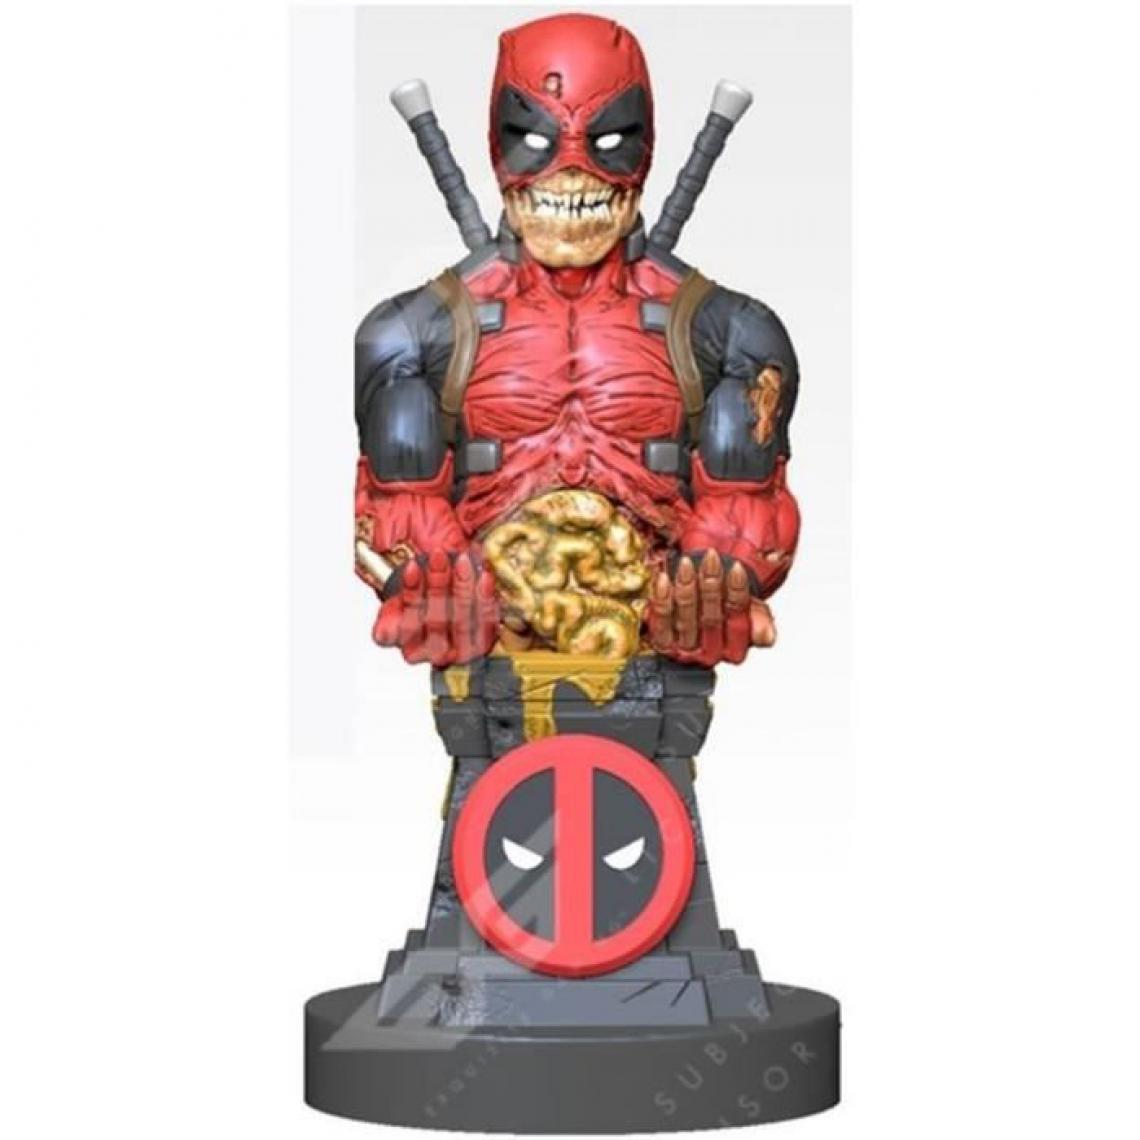 Exquisite Gaming - Figurine Support & Chargeur pour Manette et Smartphone - EXQUISITE GAMING - DEADPOOL ZOMB - Mangas